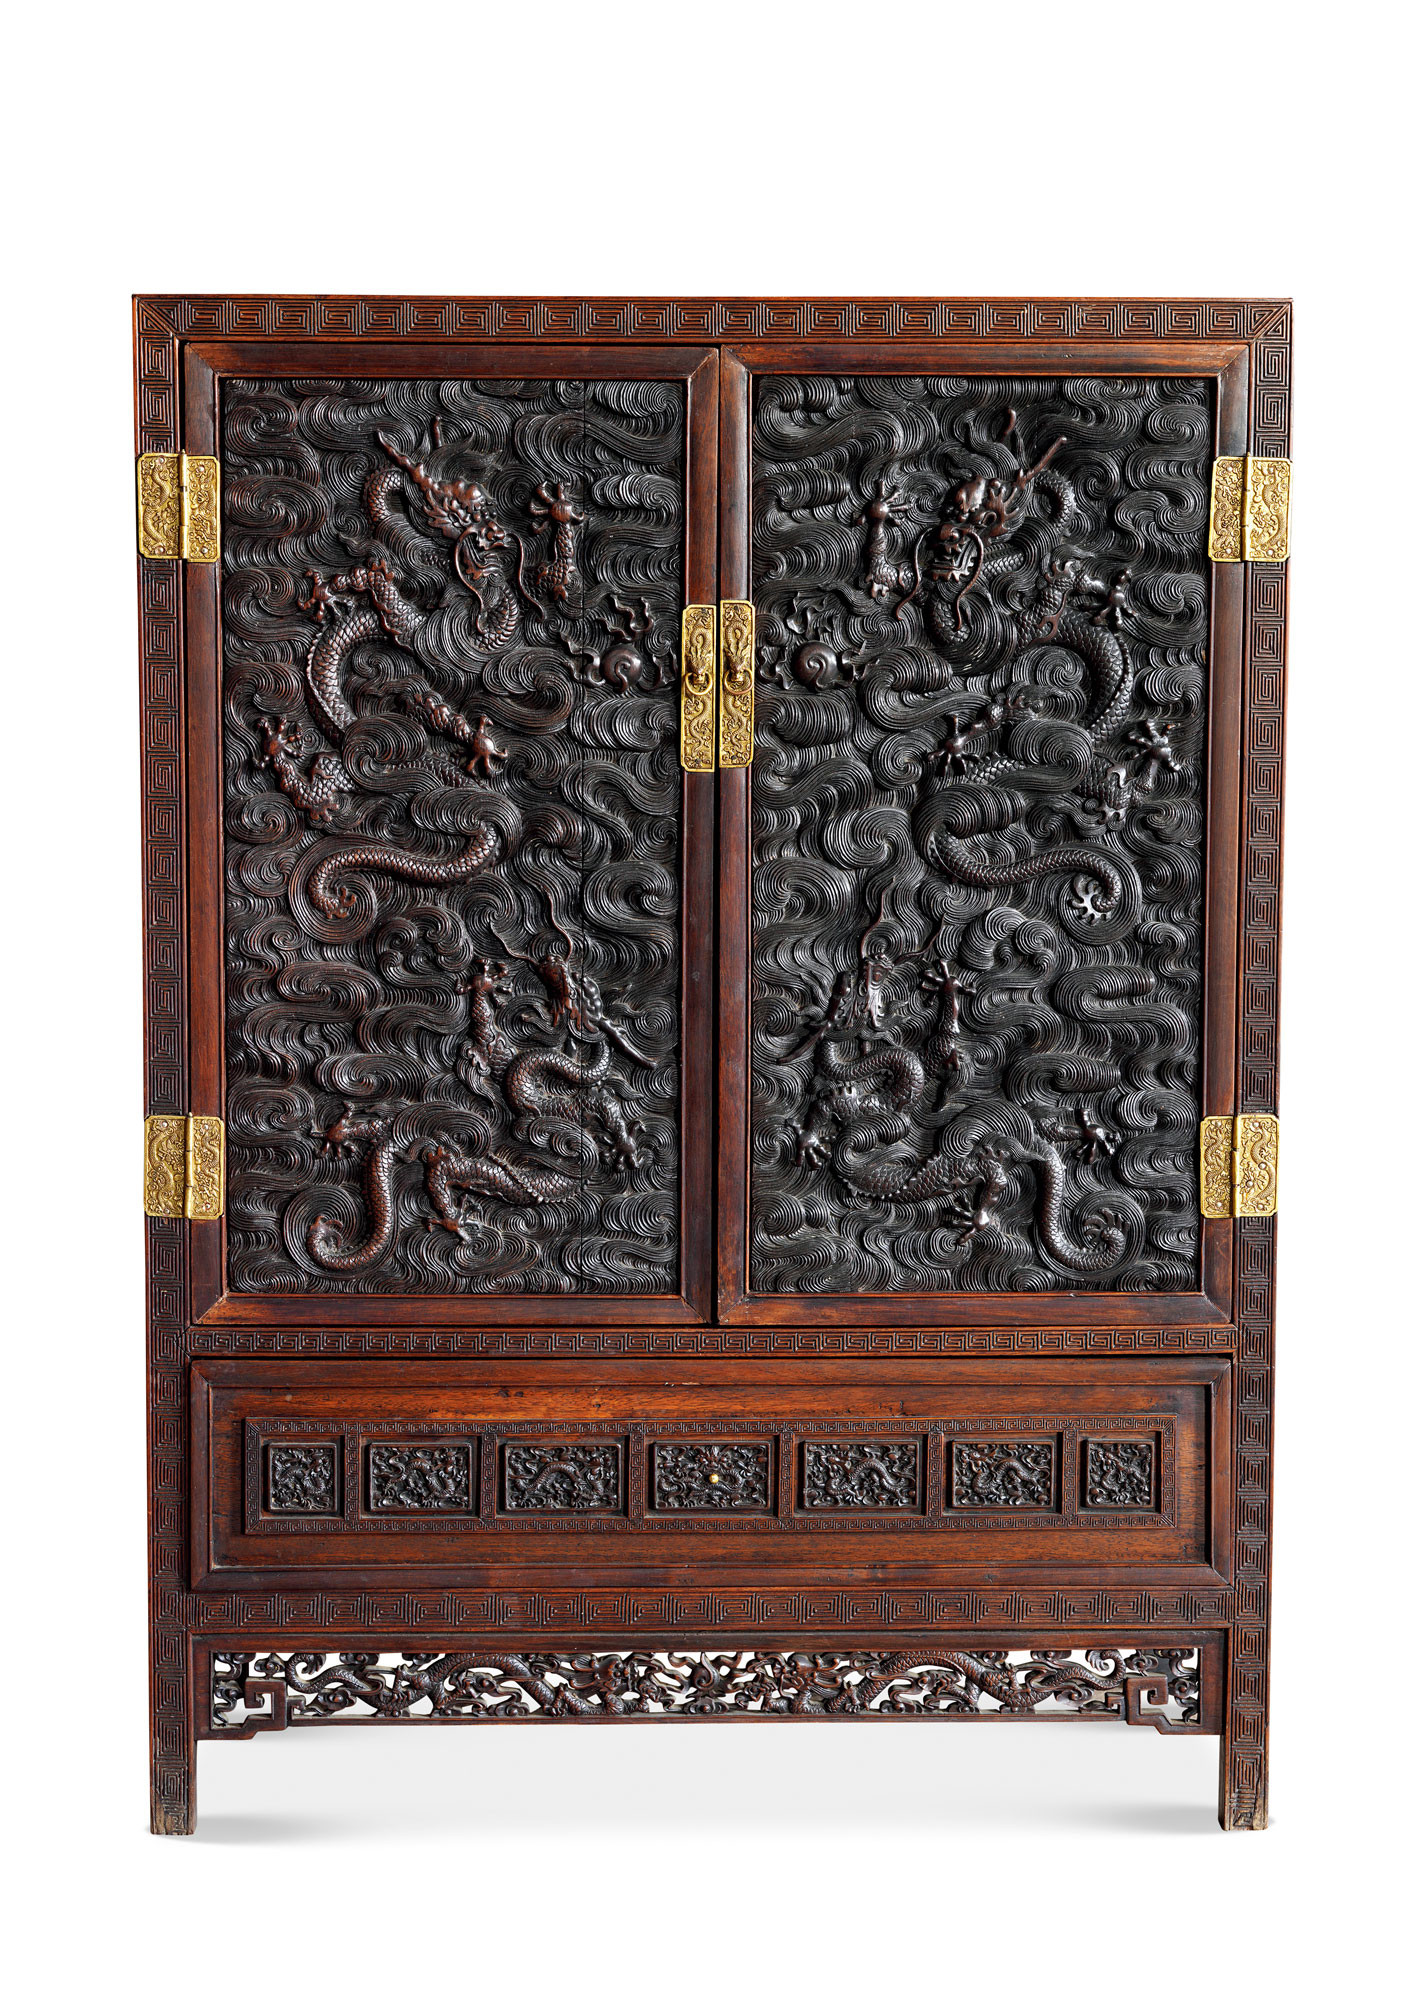 A RARE ZITAN AND JICHI-WOOD CARVED‘DRAGONS’CABINET